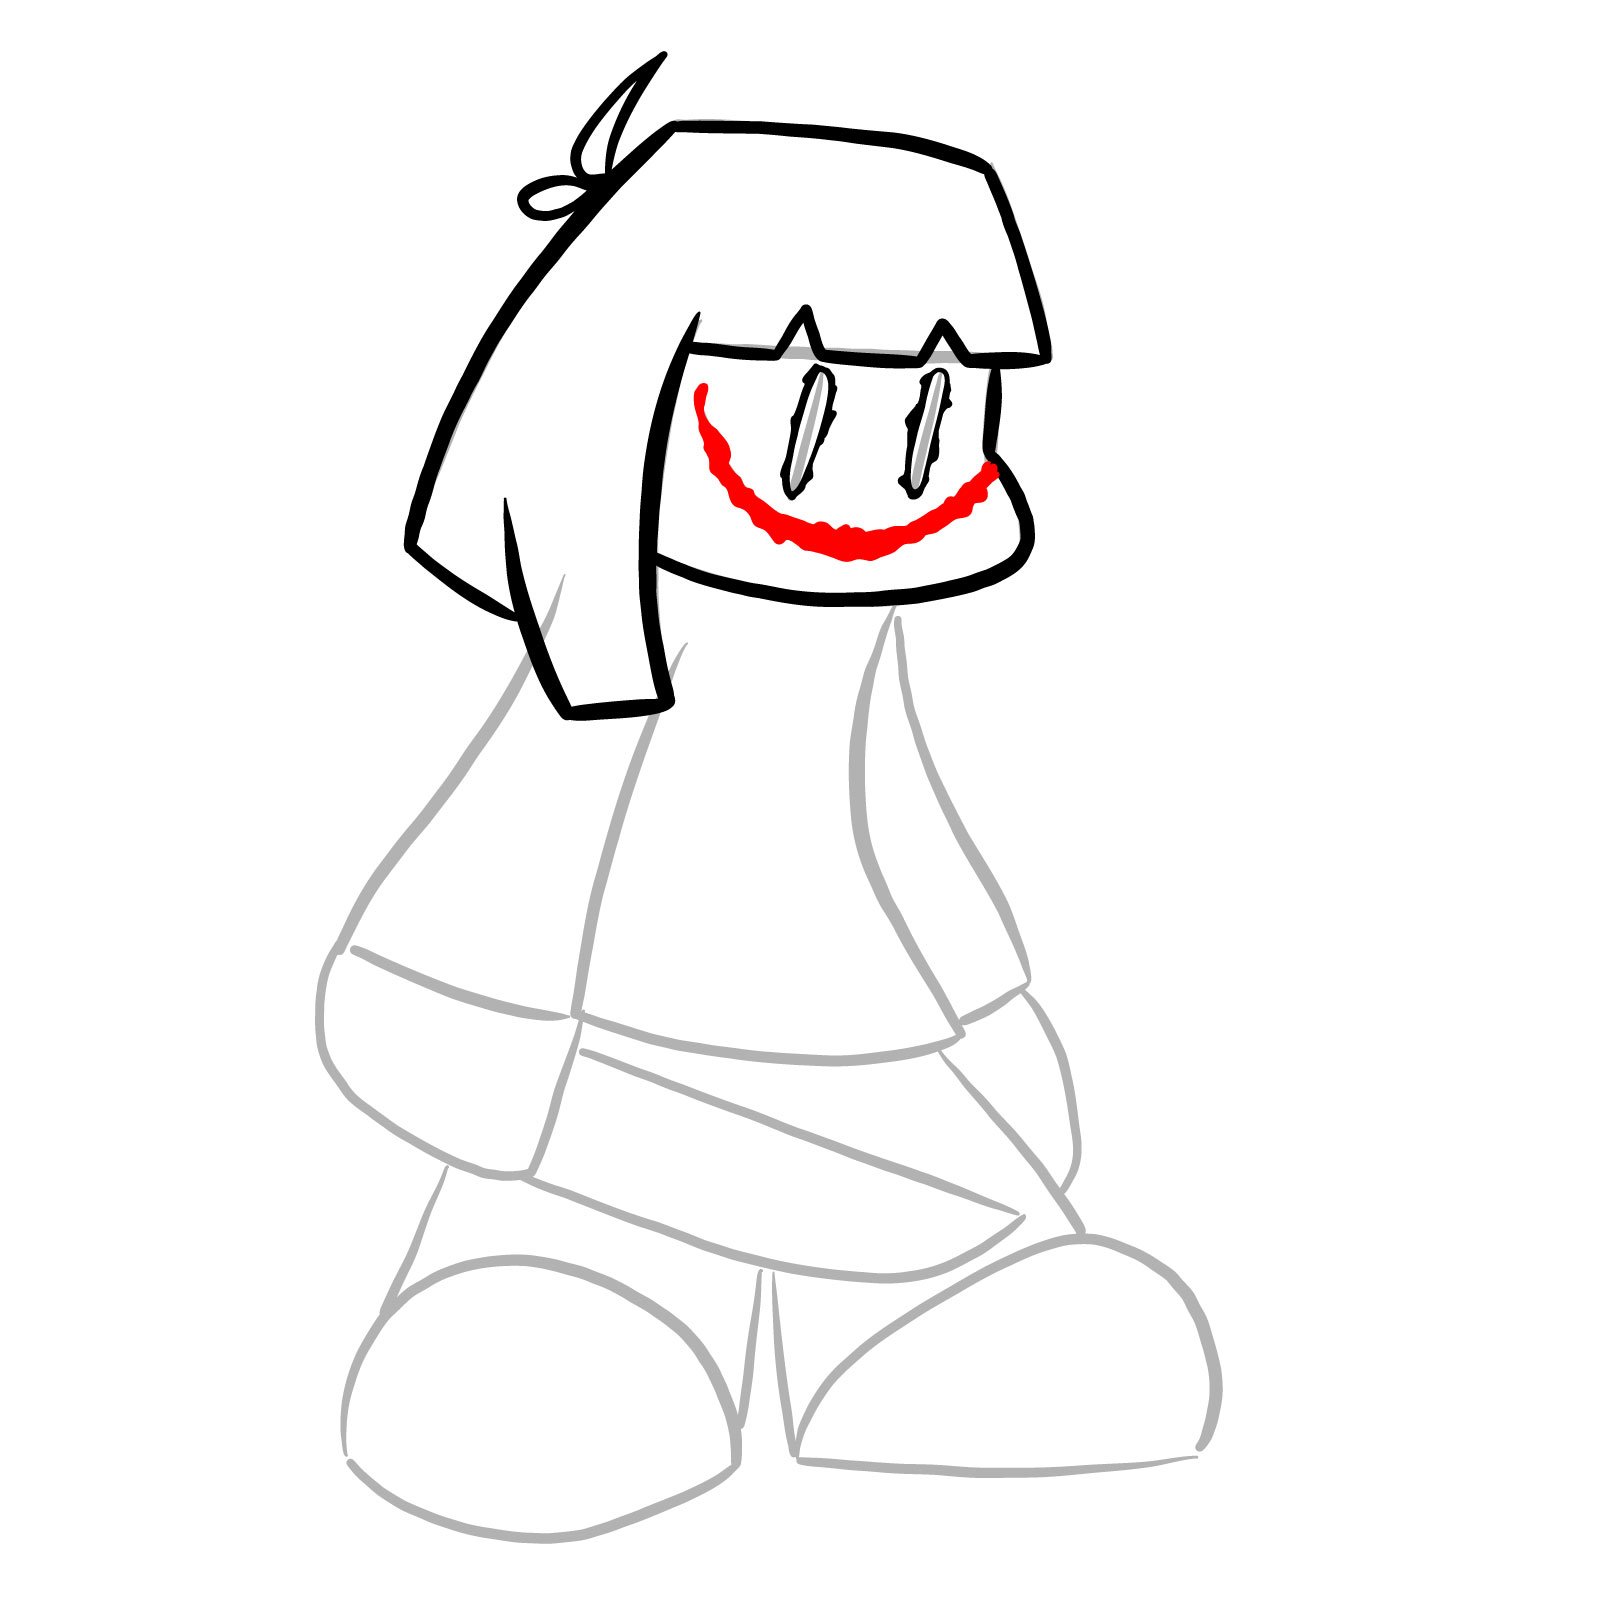 How to draw Chara from Friday Night Dustin' - step 10